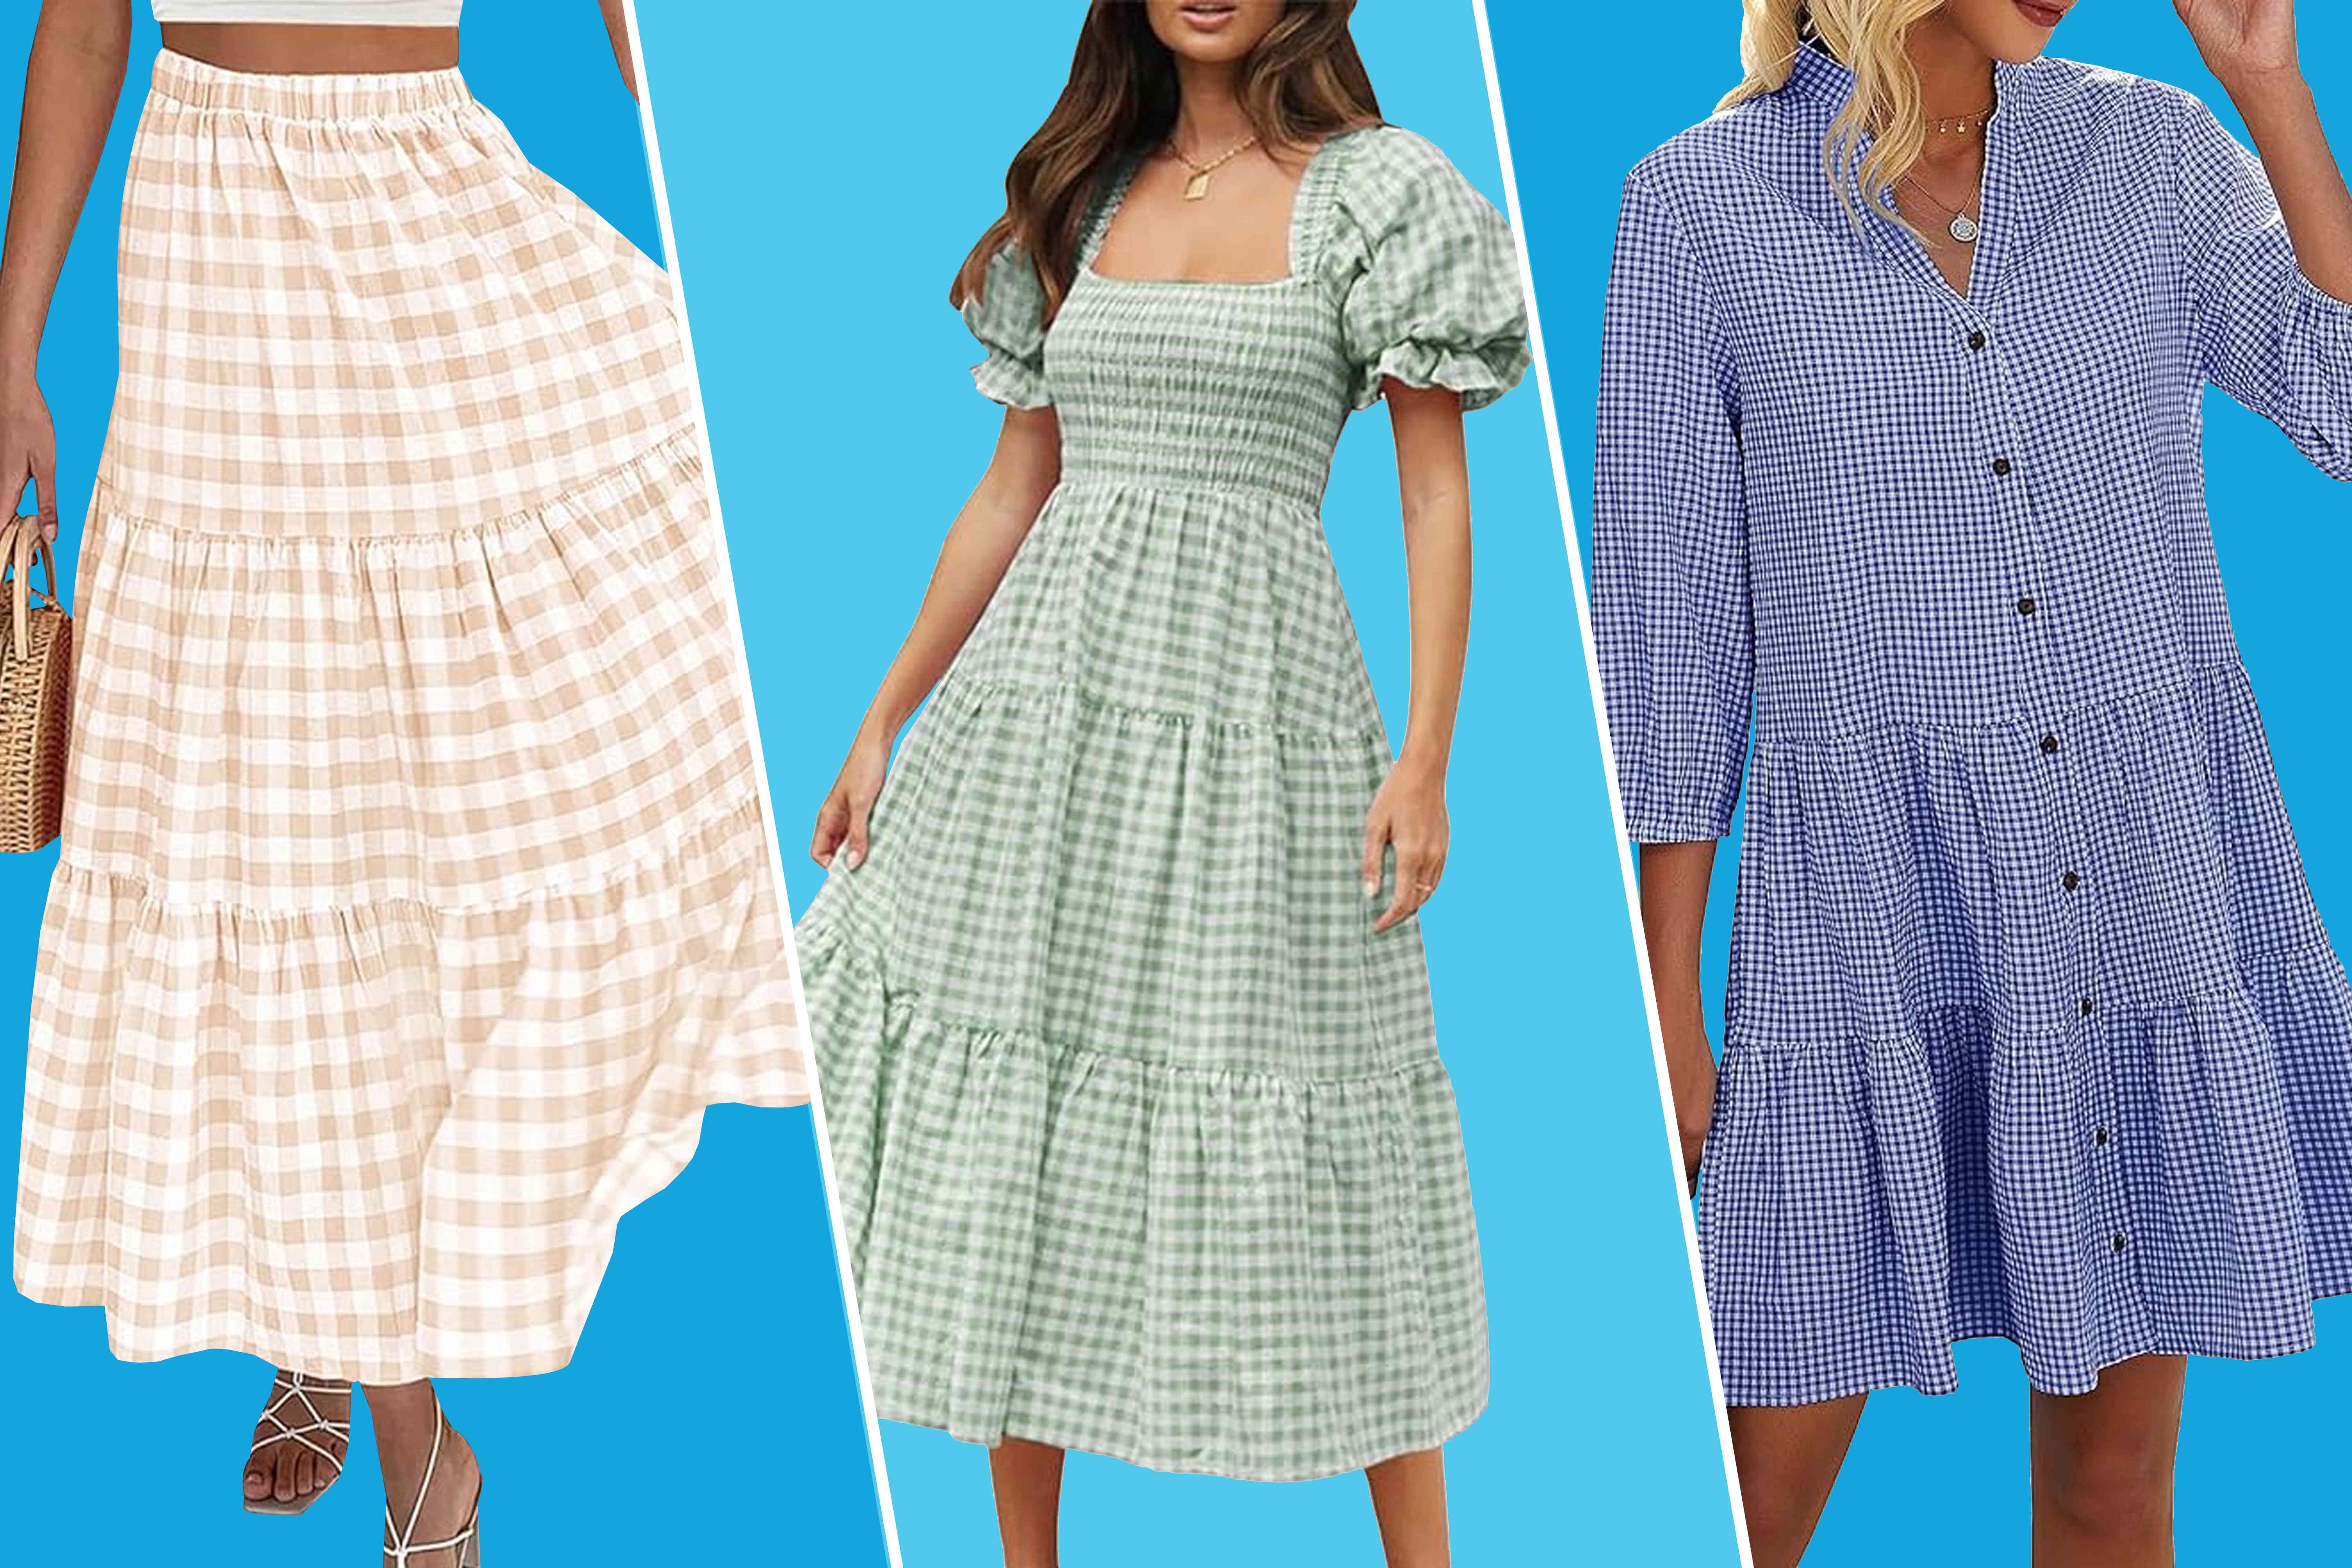 Gingham Fashion Is Trending for Summer, and Our Favorite Styles Start at $19 at Amazon